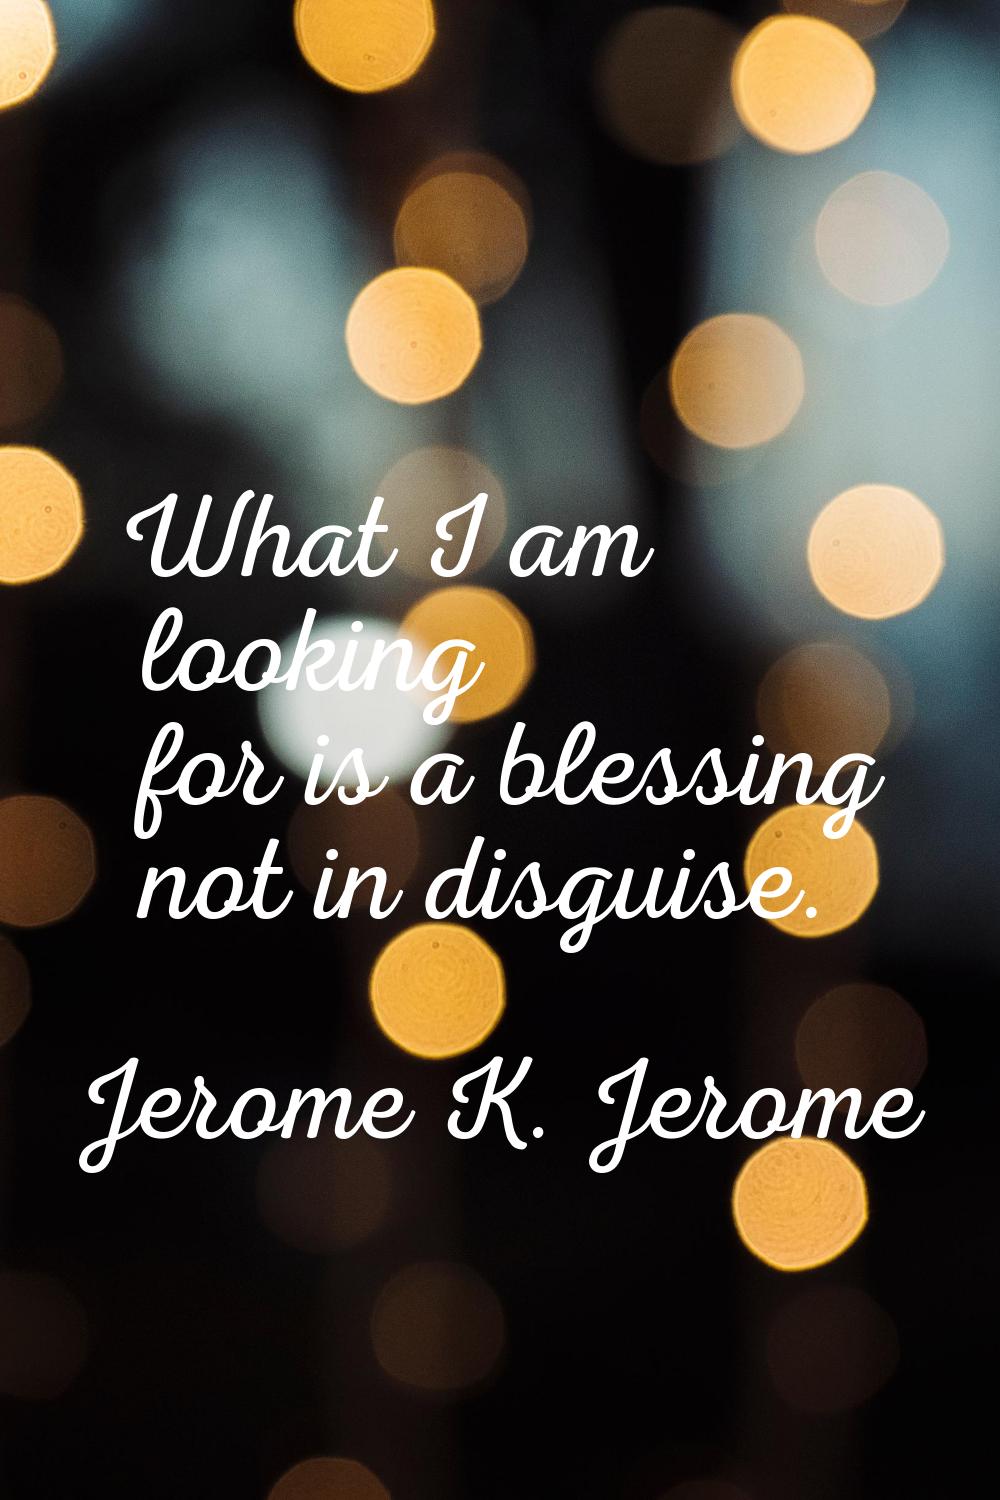 What I am looking for is a blessing not in disguise.